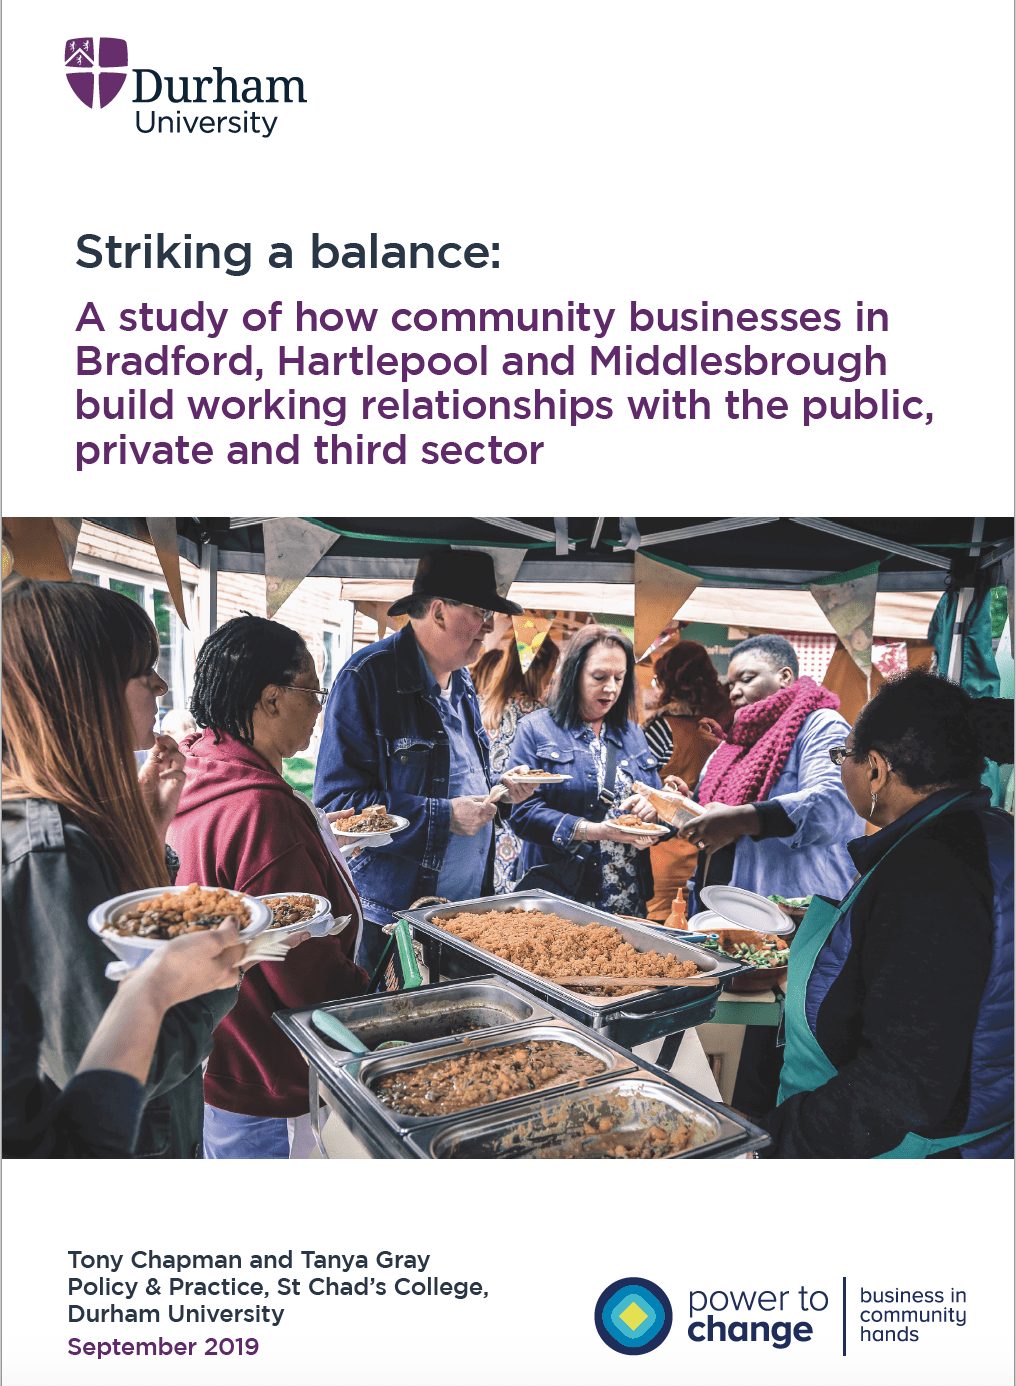 Striking a balance: a study of how community businesses in Bradford, Hartlepool and Middlesbrough build working relationships with the public, private and third sector